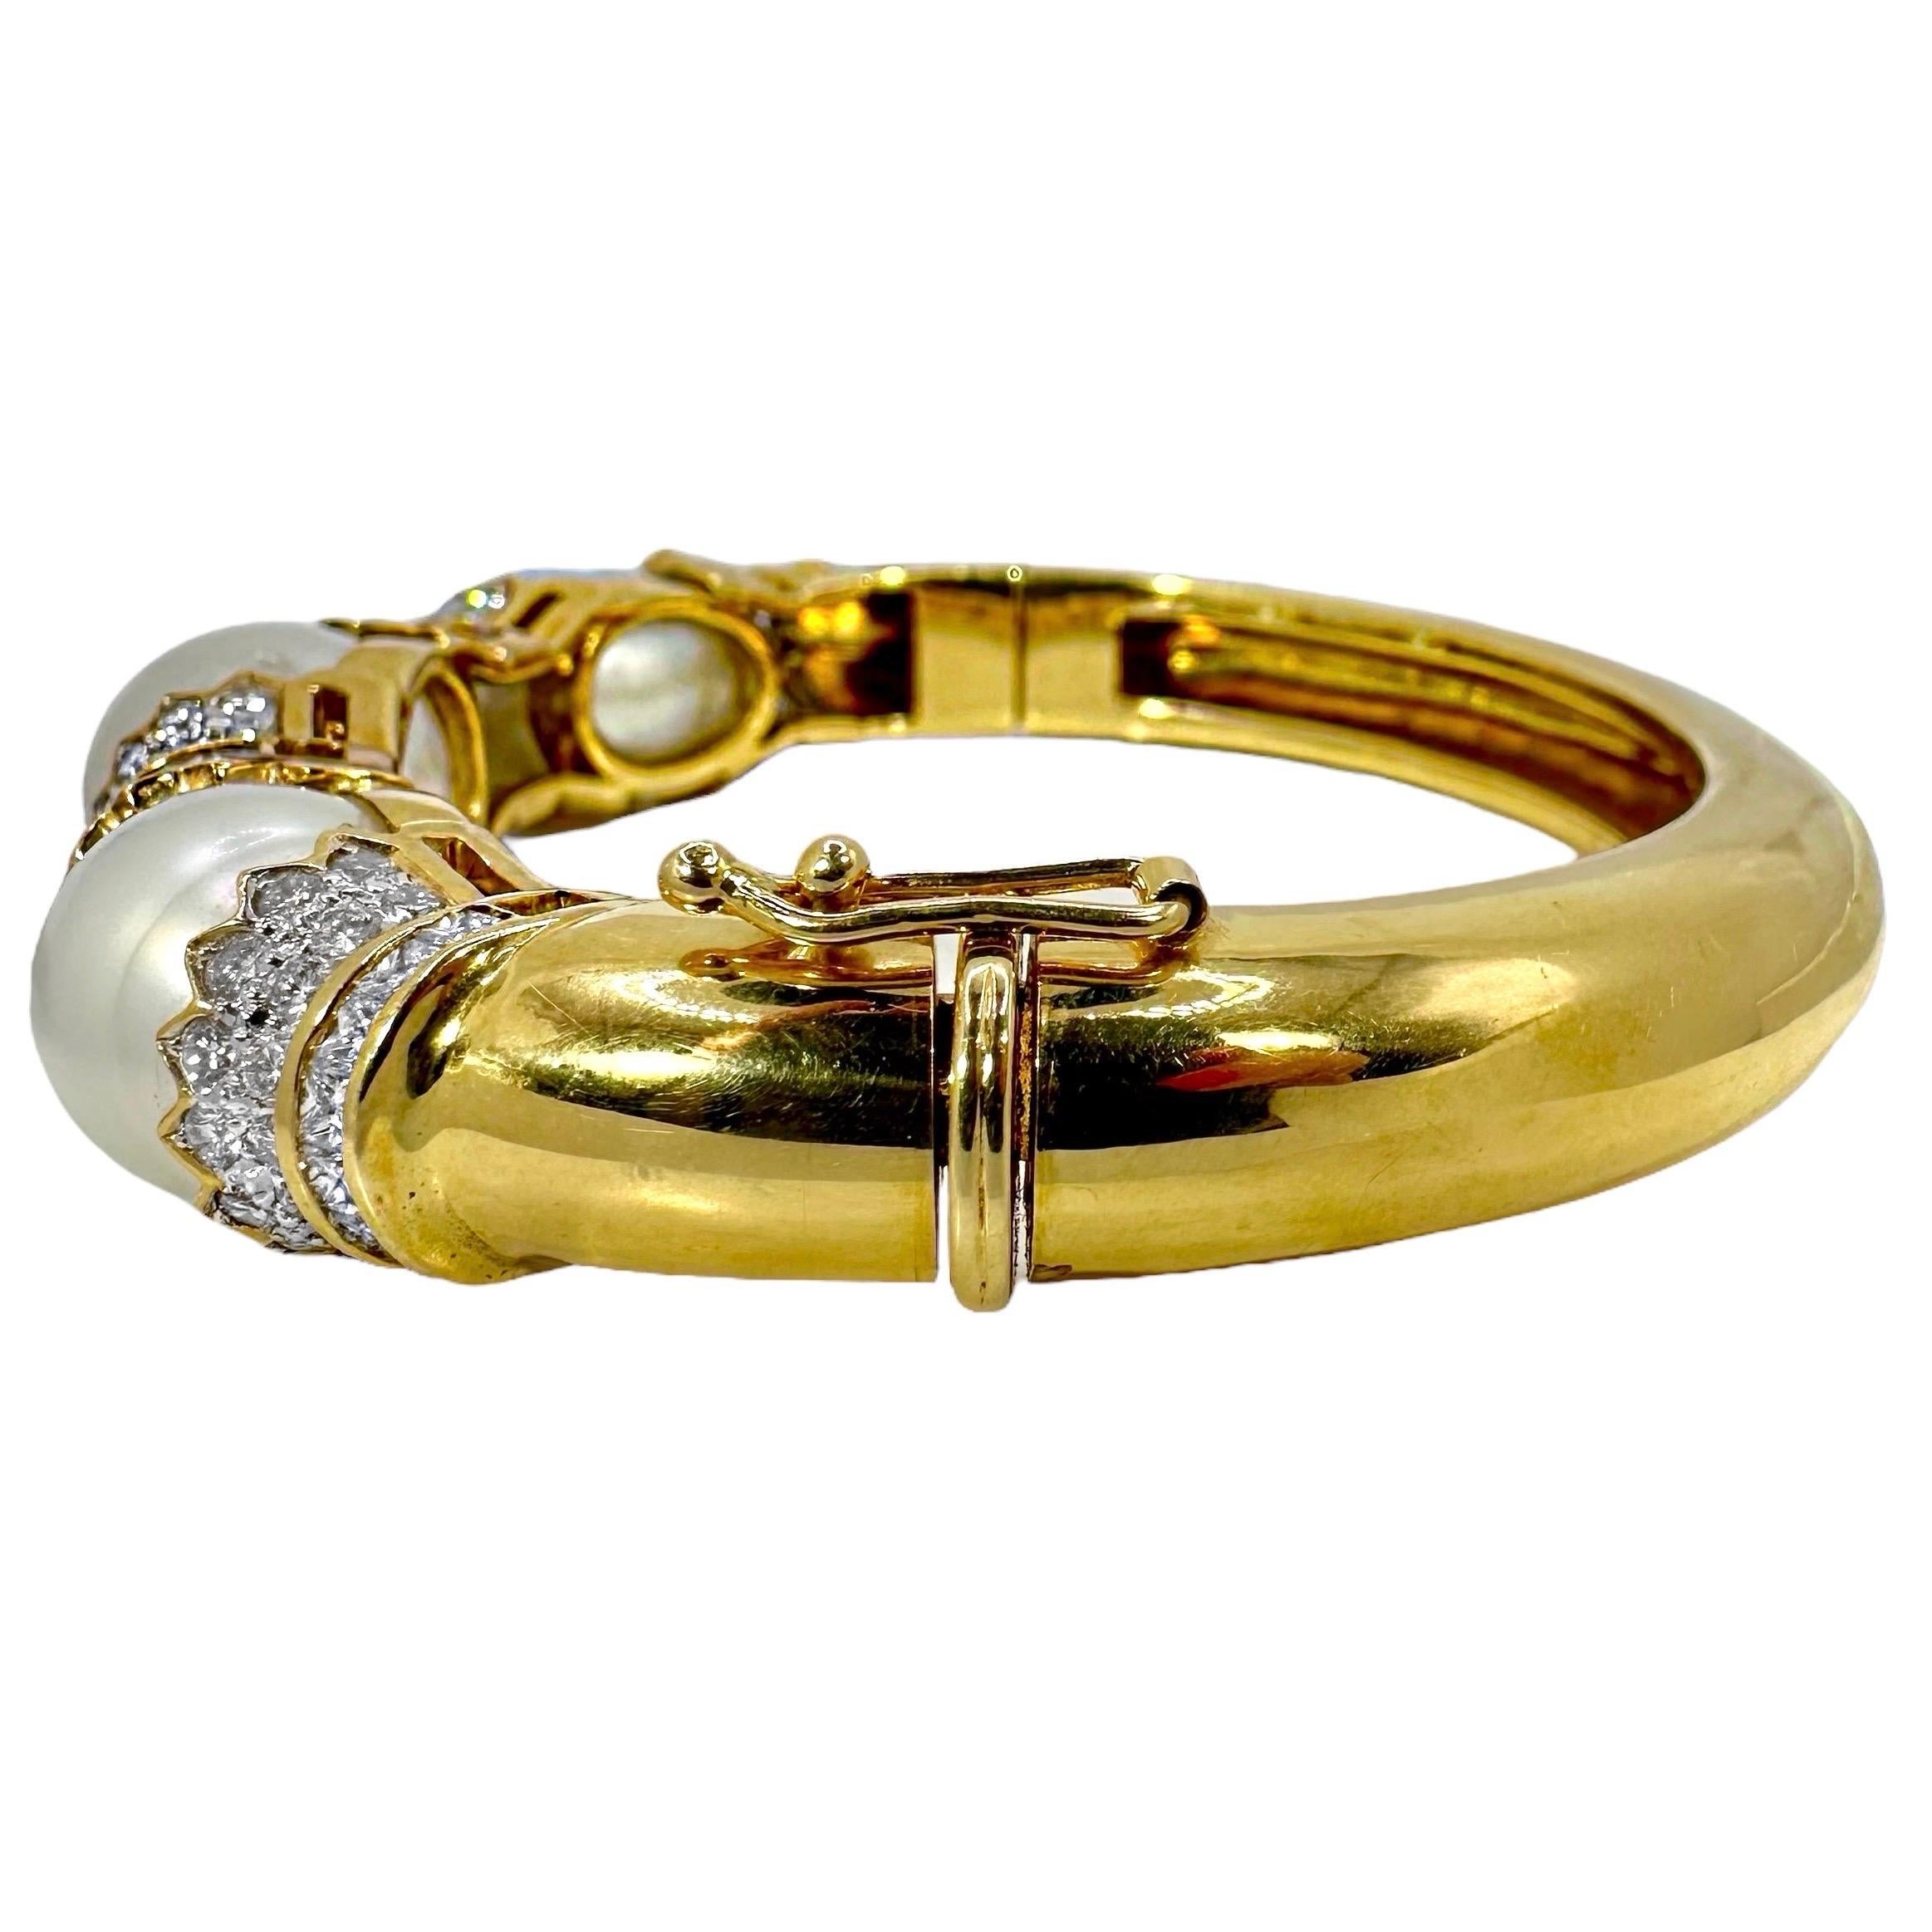 Brilliant Cut South Sea Pearl and Diamond Encrusted 18K Yellow Gold Cuff Bracelet  For Sale